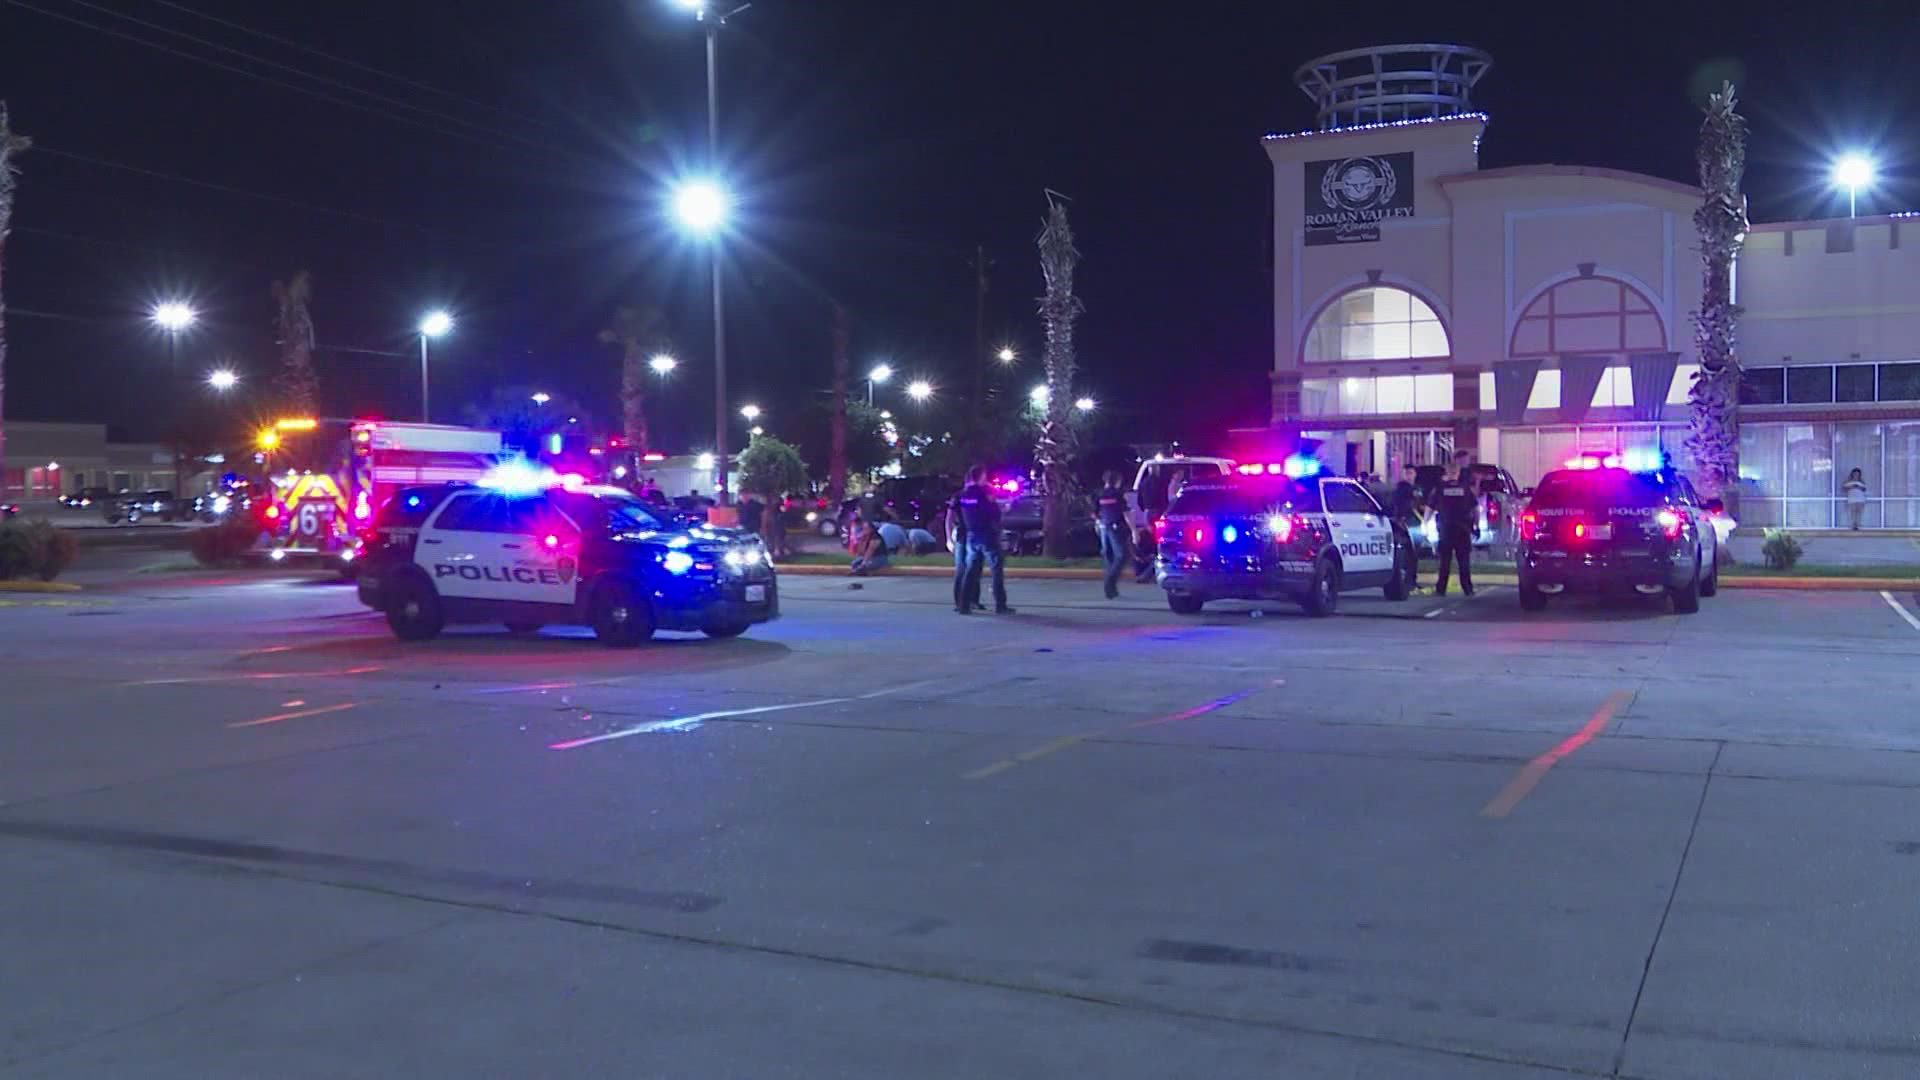 Two men were shot outside a nightclub overnight Sunday in north Houston. This happened at about 2:30 a.m. in the 400 block of W Little York.